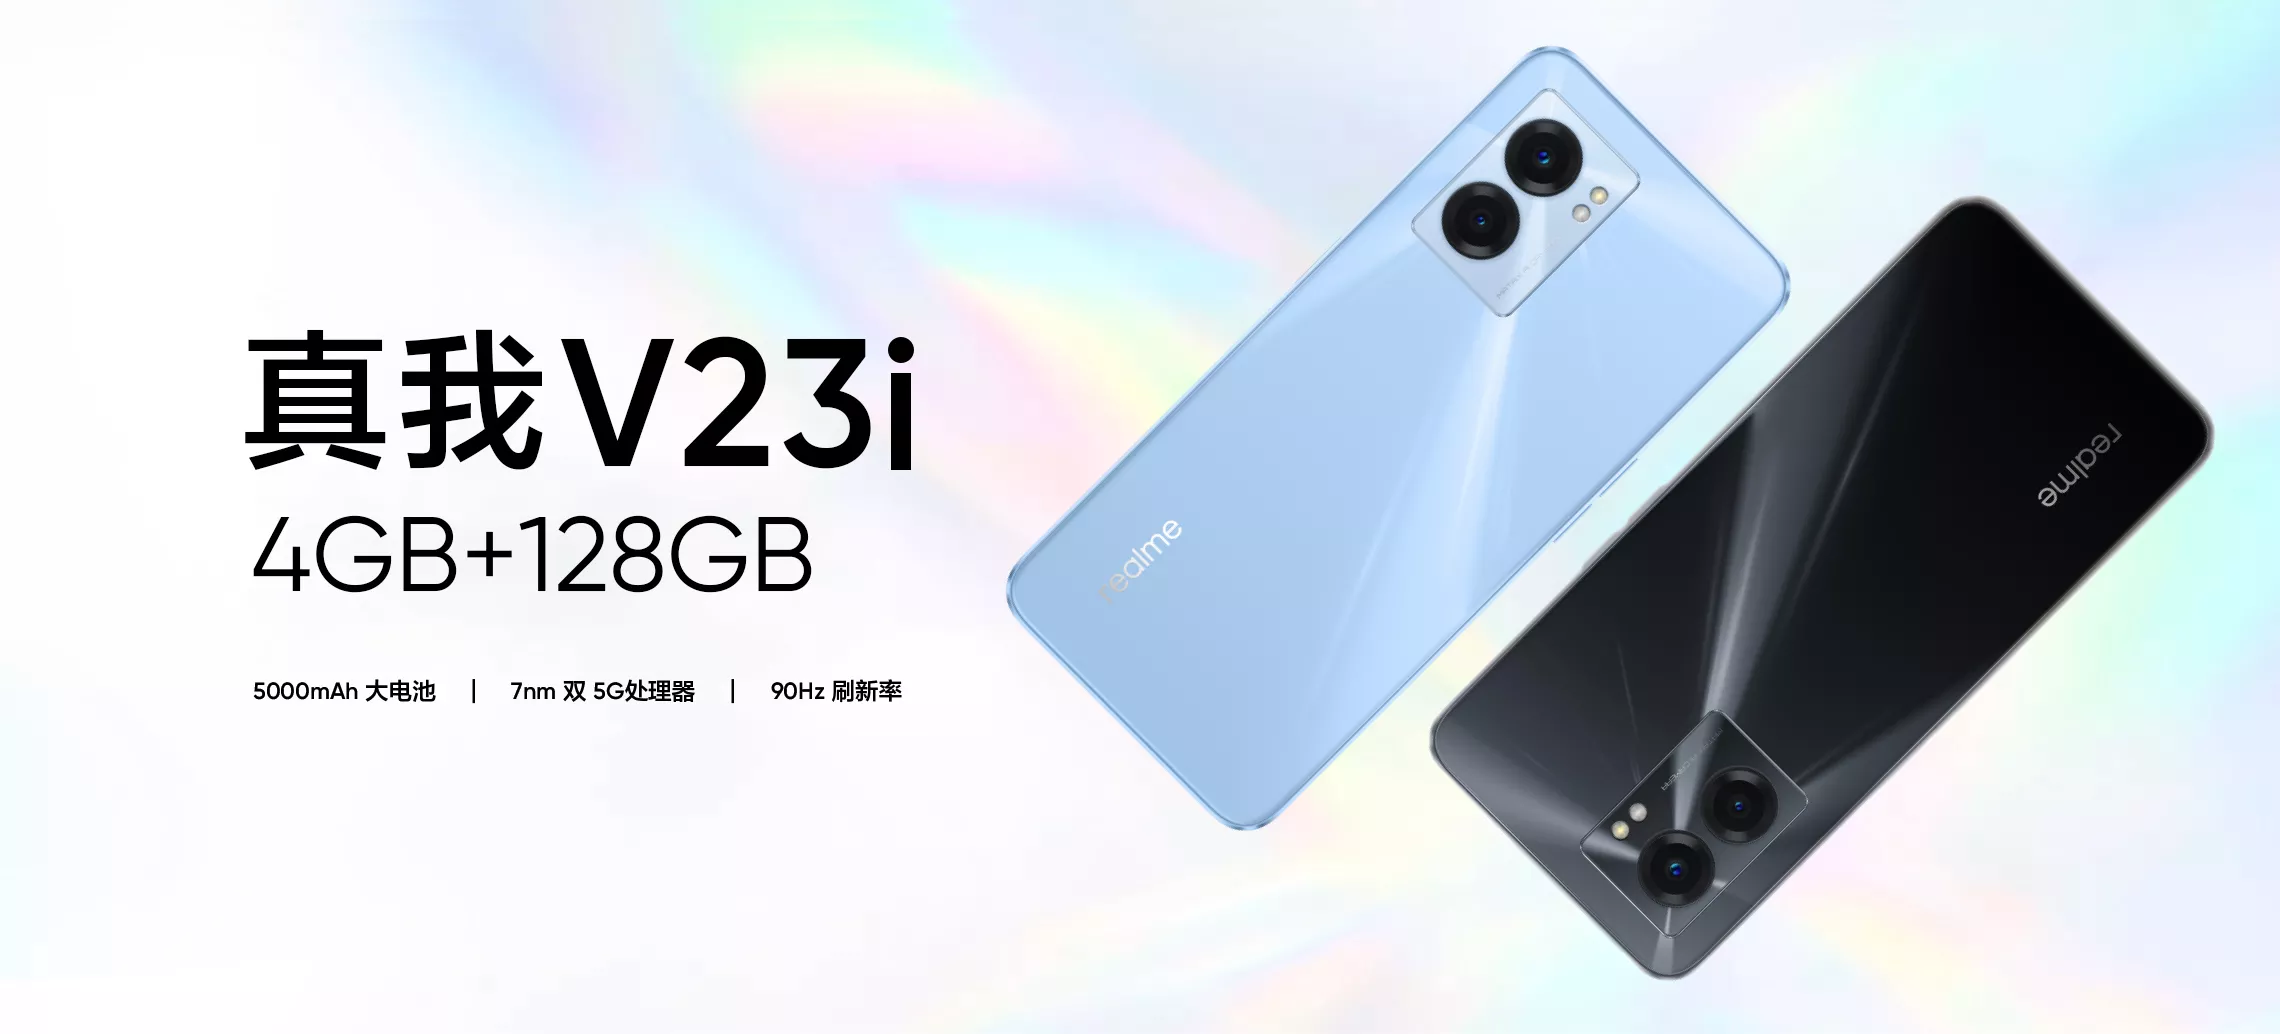 realme unexpectedly introduced the V23i smartphone on Dimensity 700 for $290